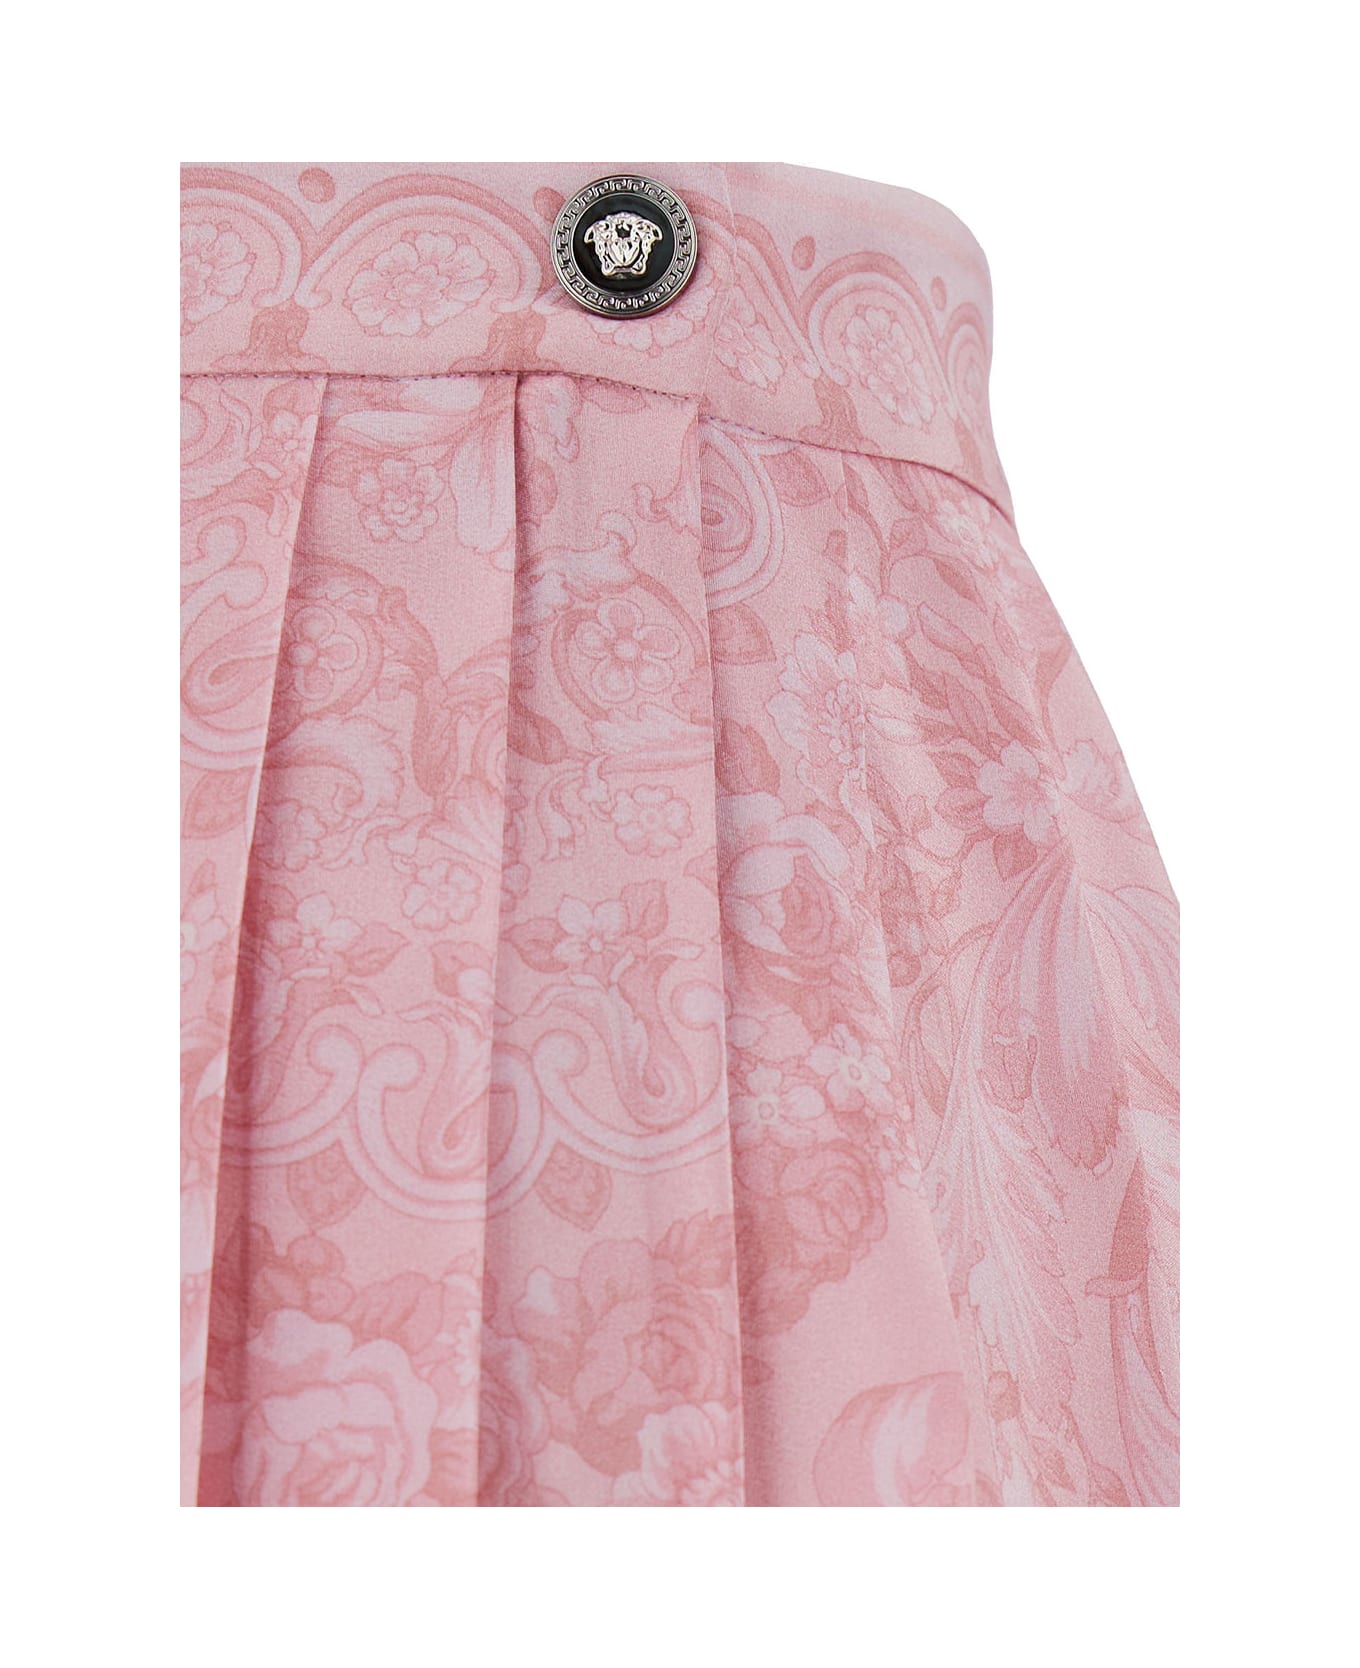 Versace Pink Pleated Mini Skirt With Barocco Motif In Silk Woman - Pink